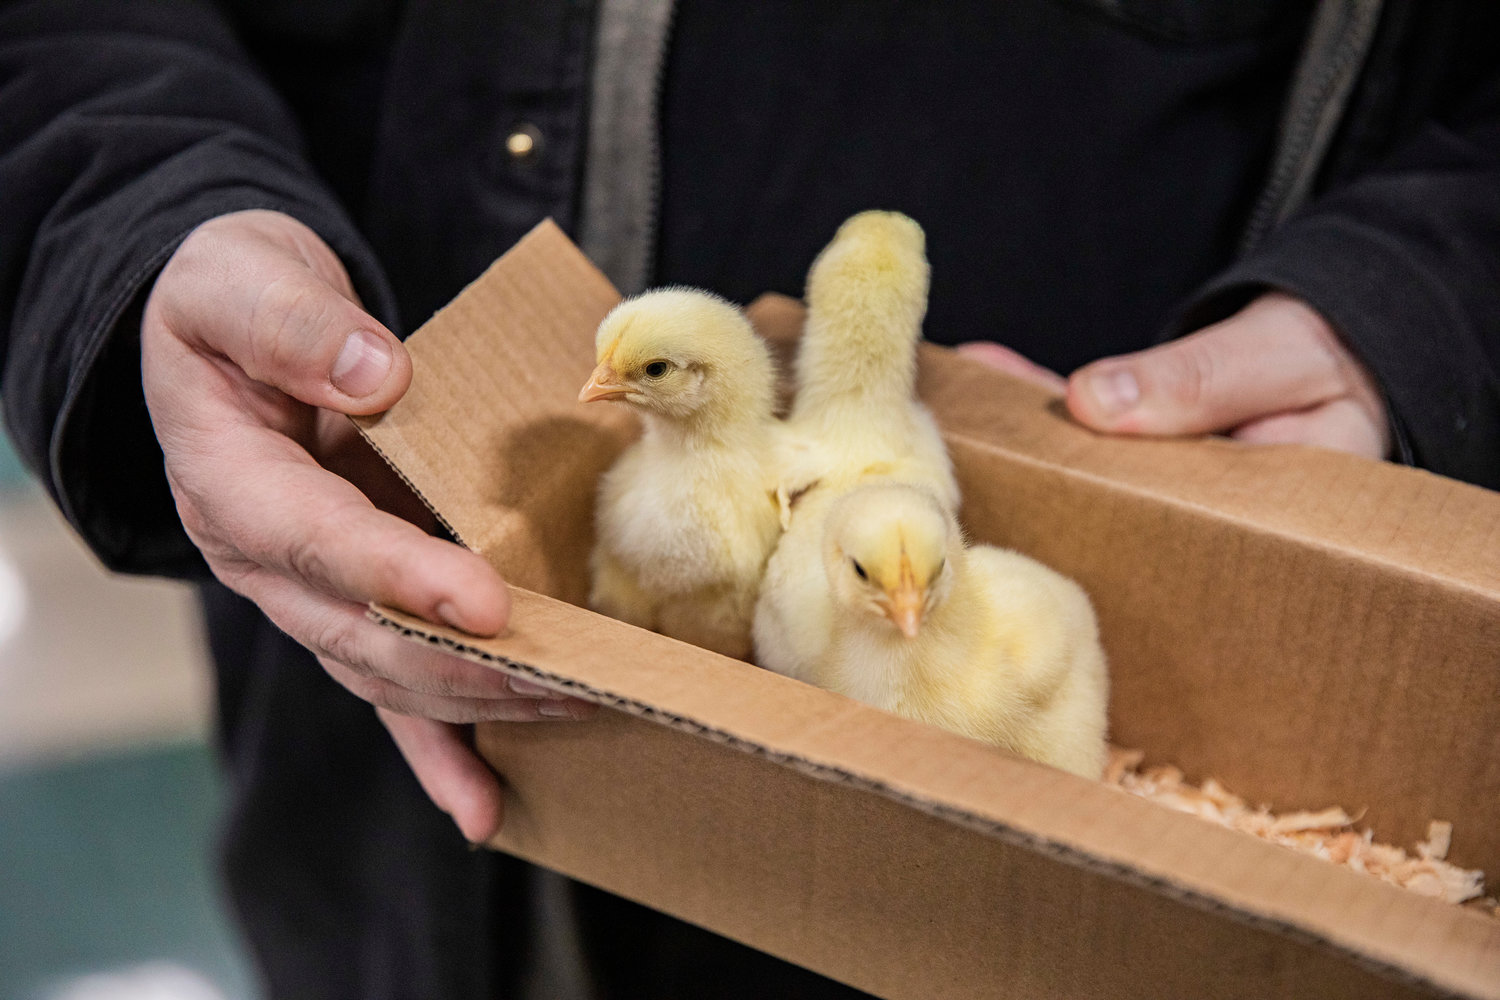 Chicks poke their heads up from a cardboard box in the Farm Store in Chehalis on Thursday as they prepare to be taken home. The customer who bought the chicks showed a picture of his backyard flock’s eggs in various colors, saying buying new chicks was “addictive.” The Chick Days sale at the Farm Store, located at 561 W. Main St. in Chehalis, continues through Saturday, March 4.